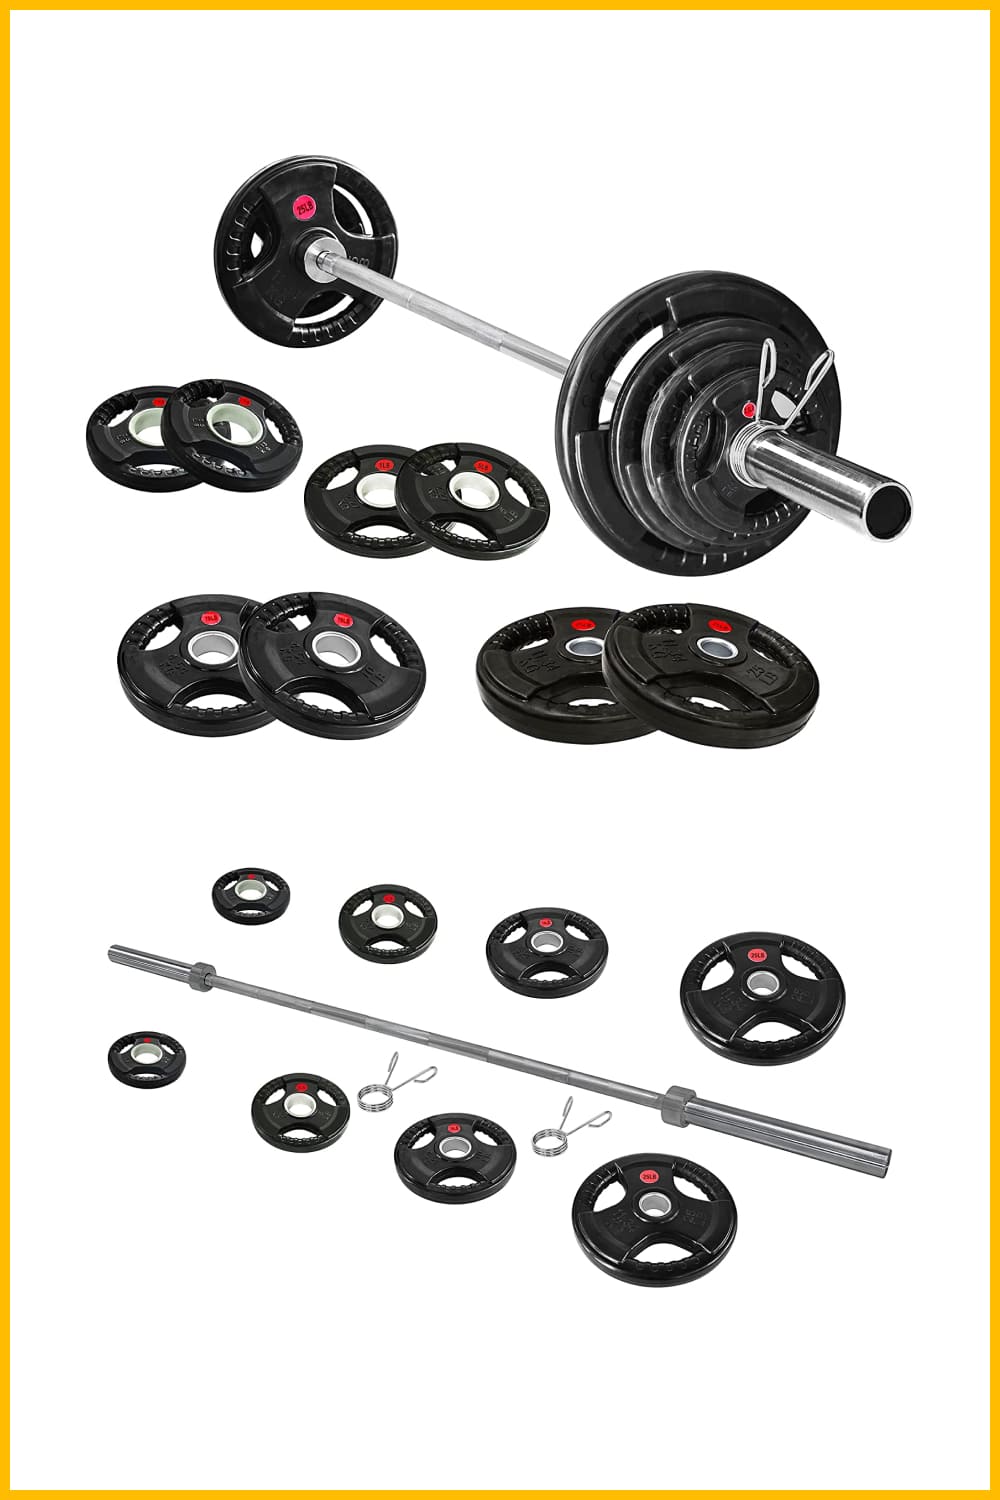 Signature Fitness Cast Iron Olympic 2-Inch Weight Plates Including 7FT Olympic Barbell.